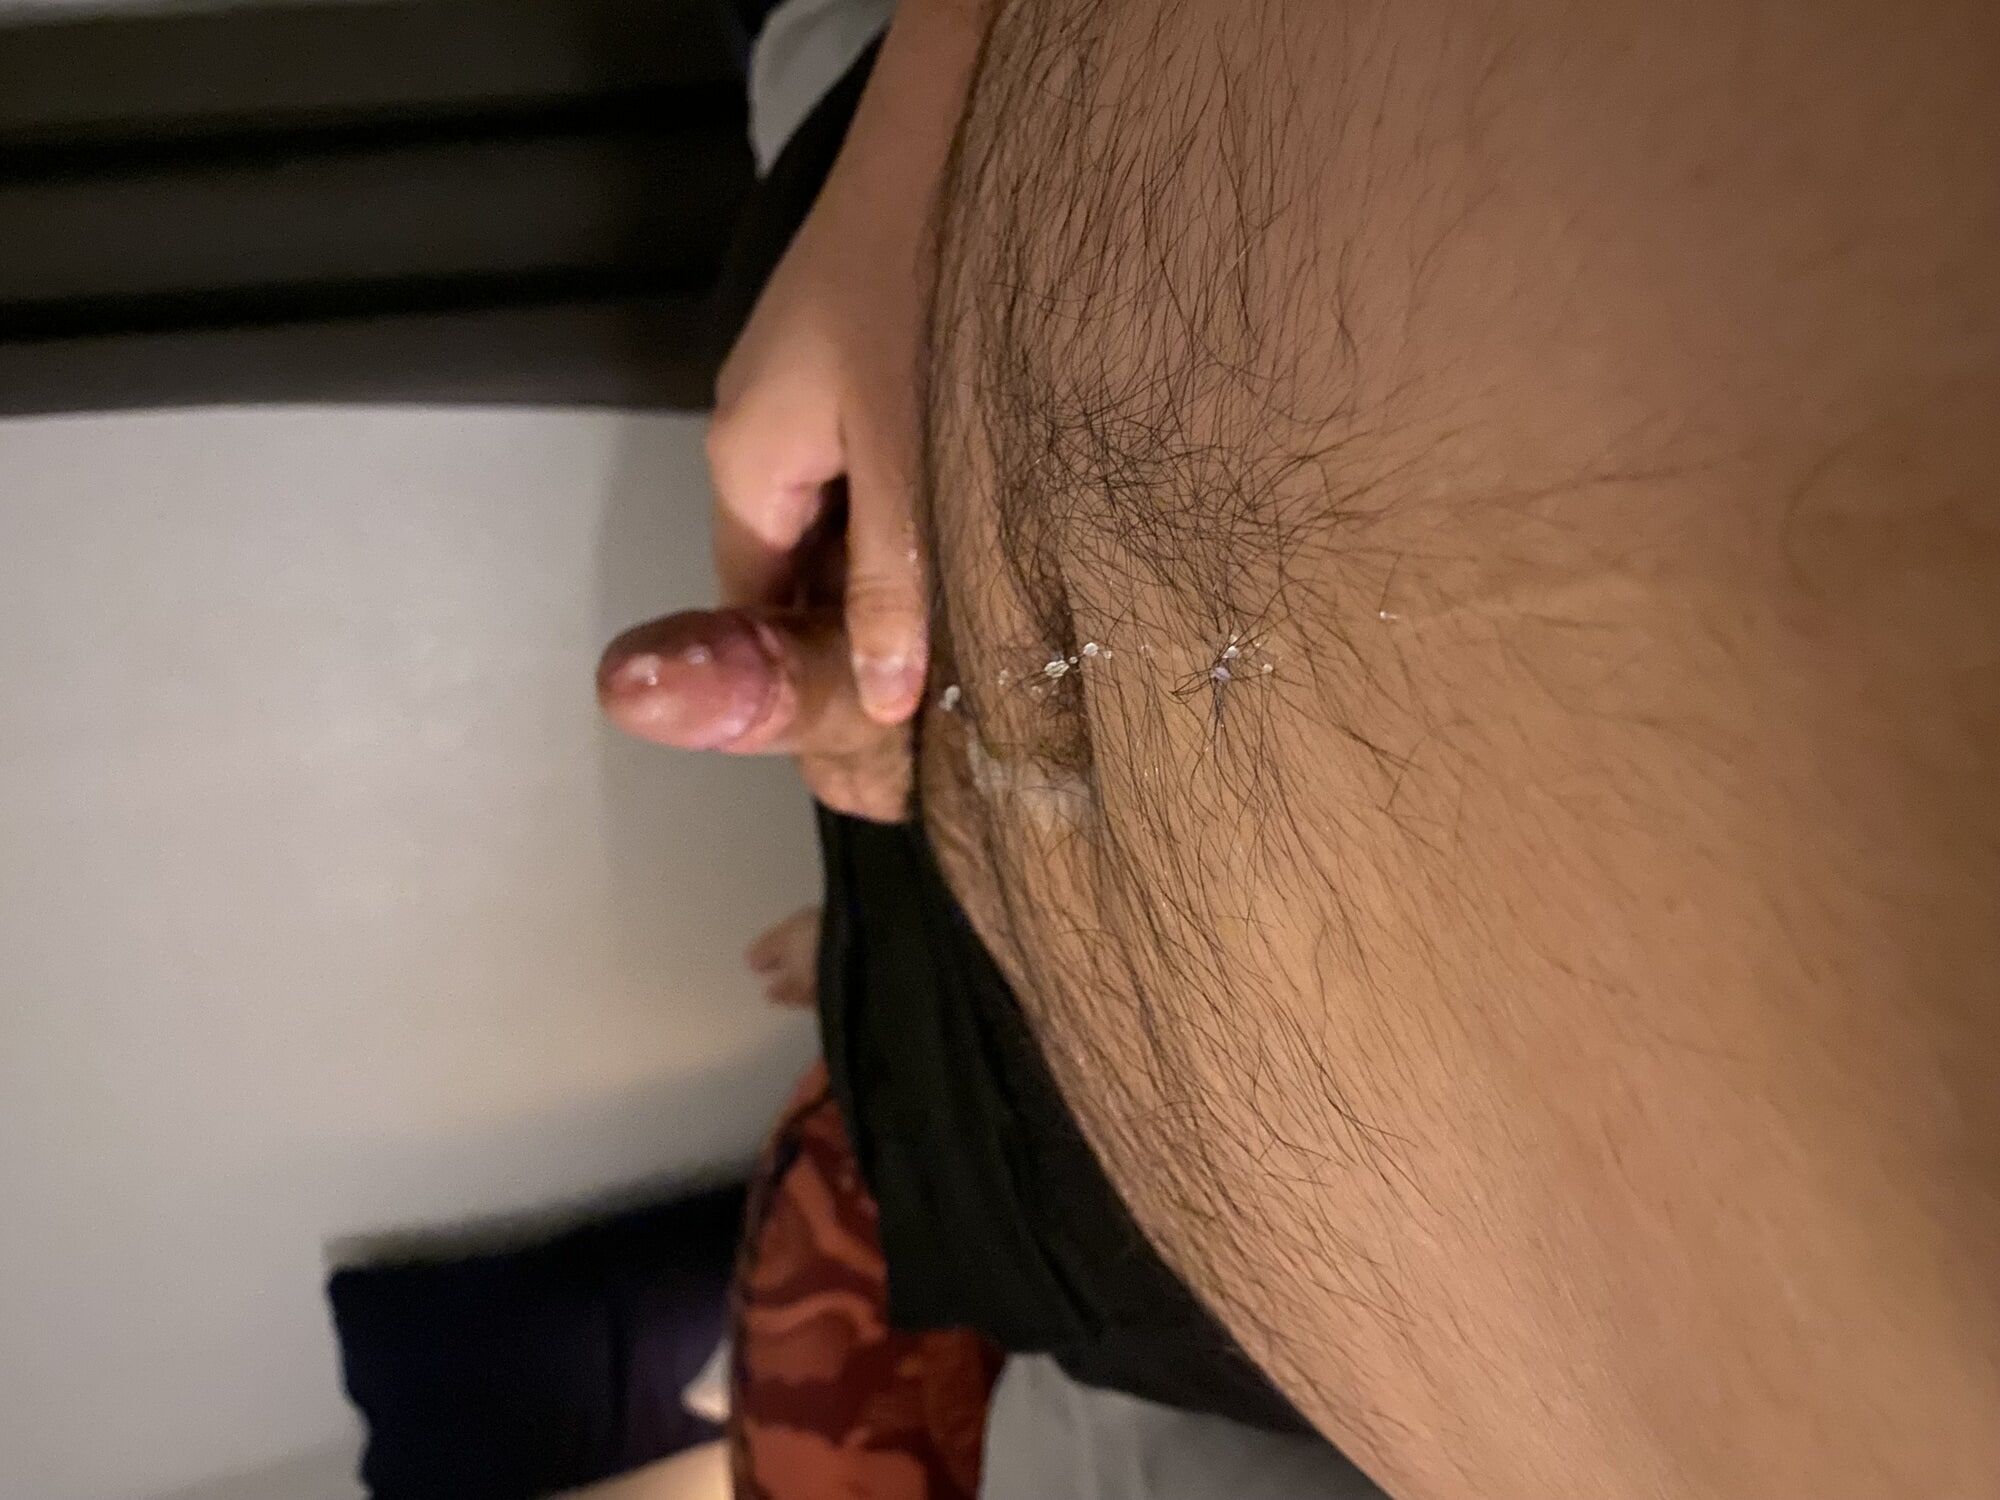 Me and small cock and phat ass